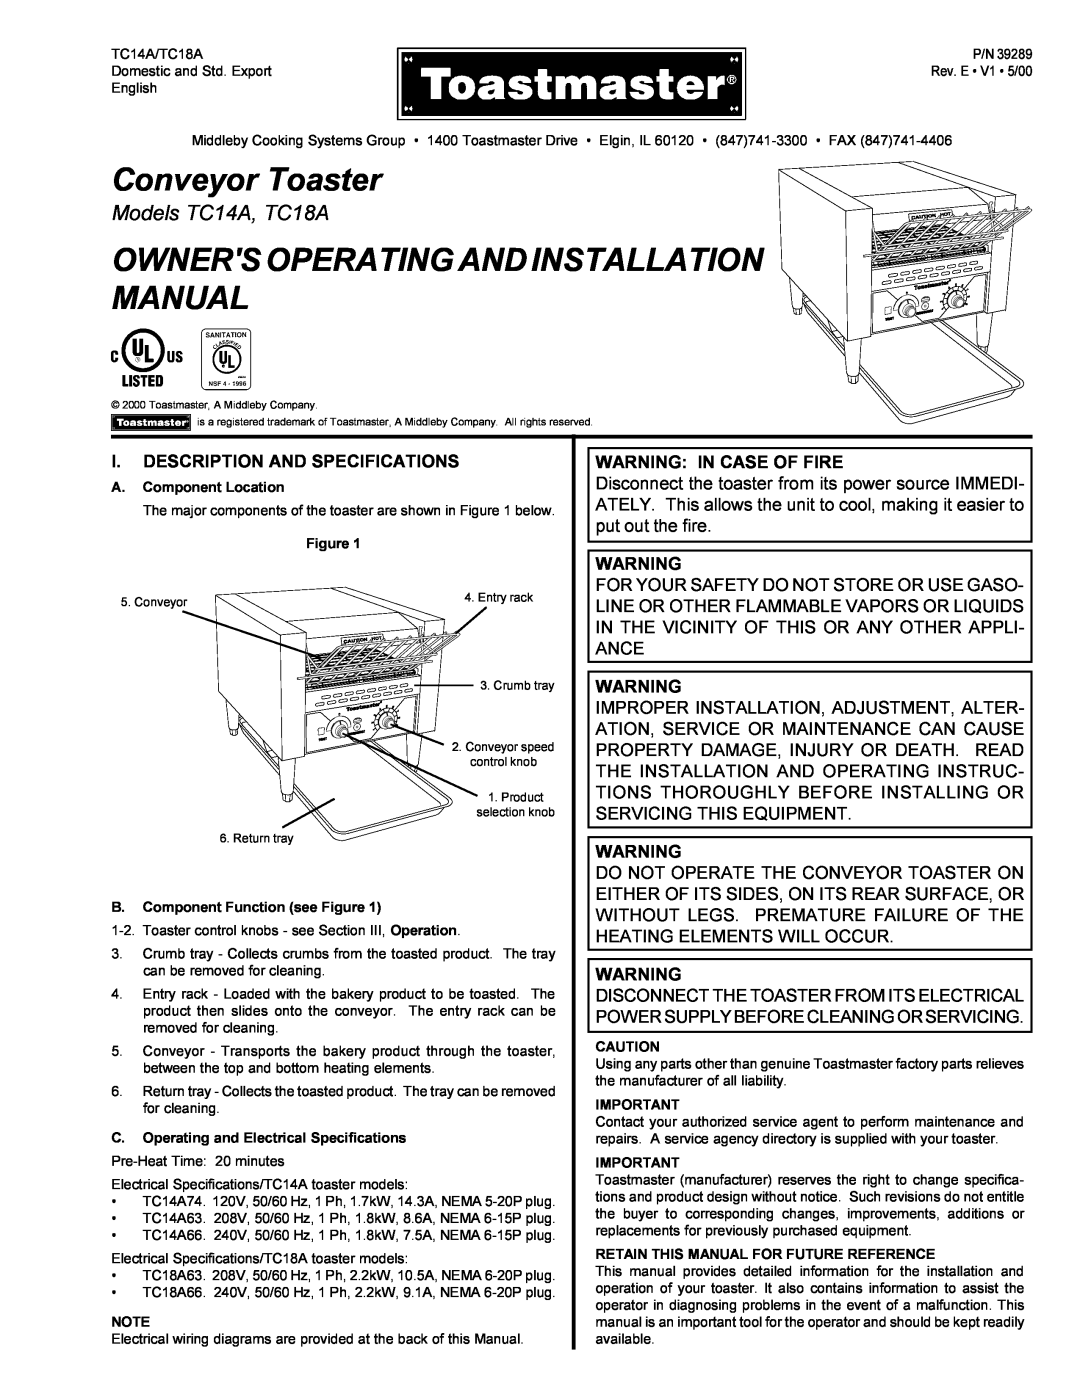 Toastmaster TC14A, TC18A installation manual I. Description And Specifications, Warning In Case Of Fire, Conveyor Toaster 